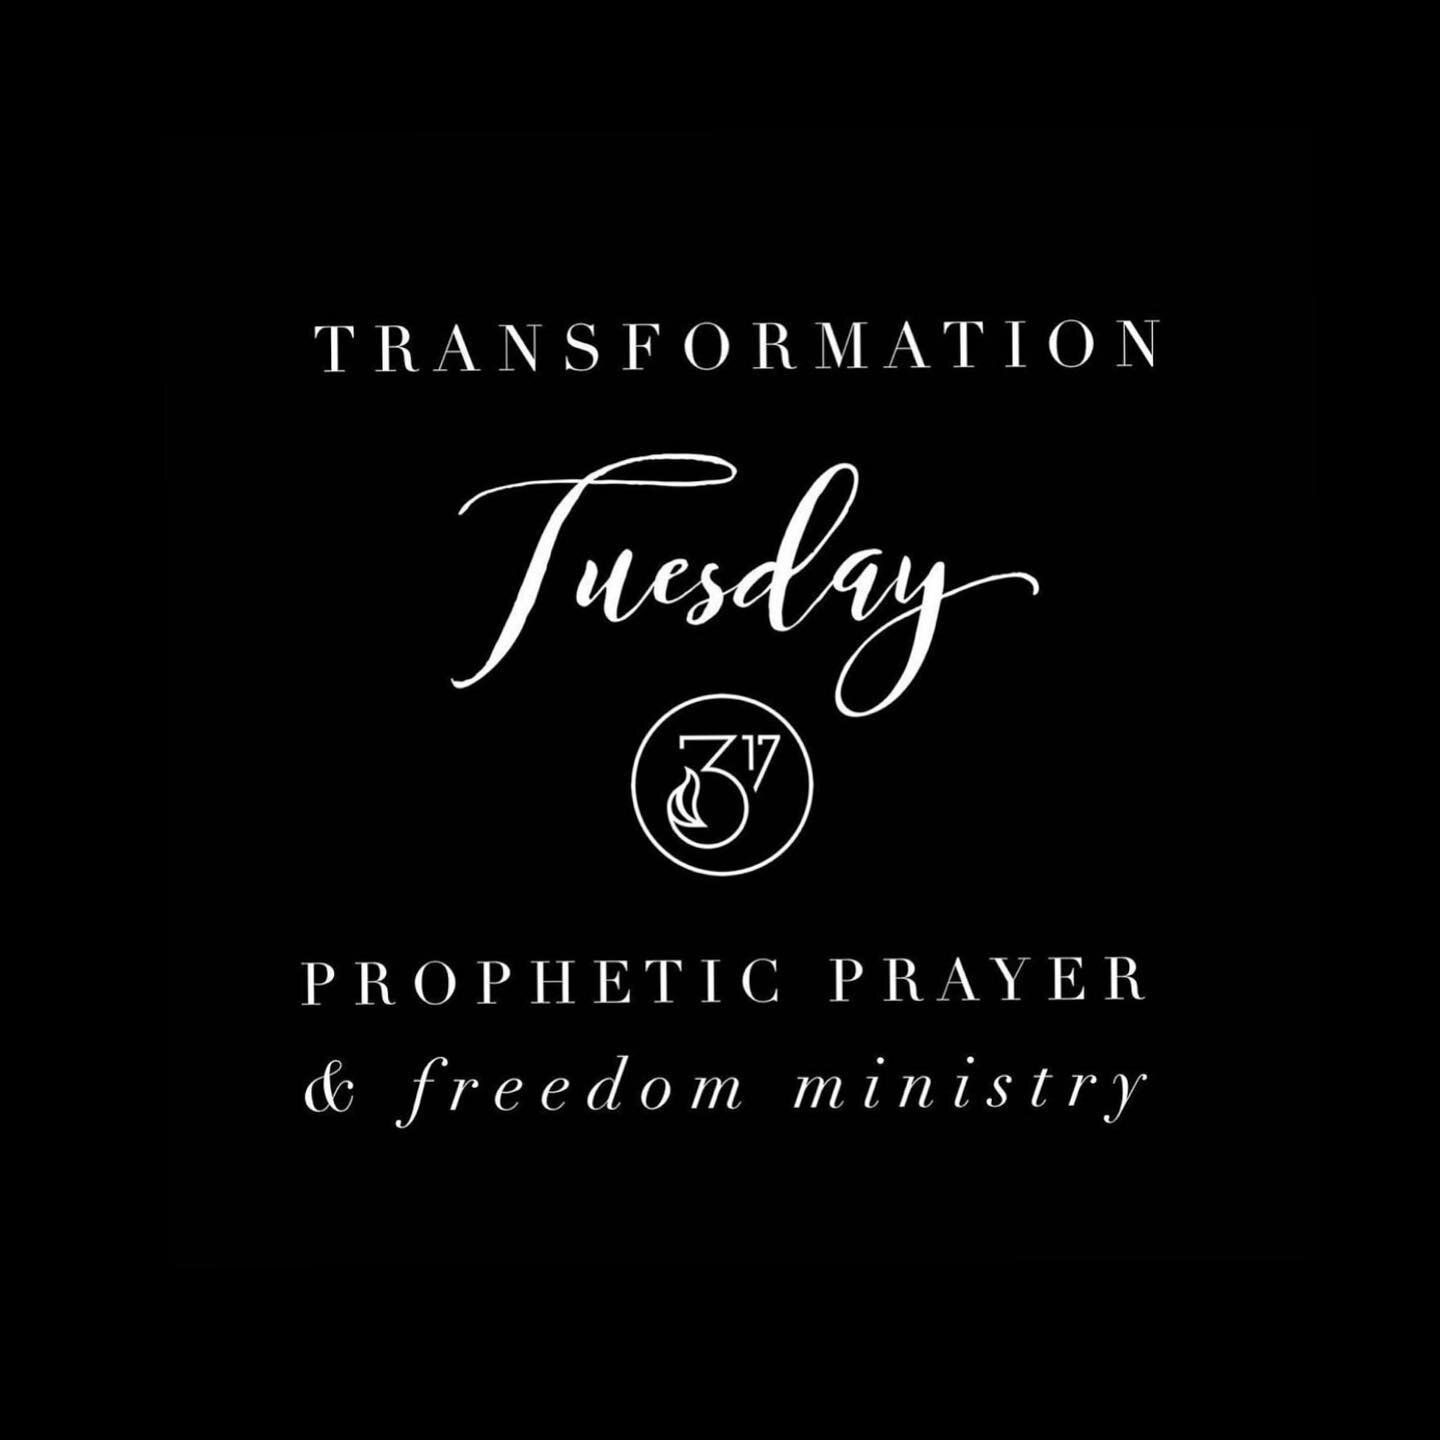 It&rsquo;s TUESDAY Prayer &amp; Prophetic time!🔥 Join us today at 12:30pm PST LIVE on @317freedom Ministry Facebook Page for #transformationtuesday LINK IN BIO
You can post your name or prayer requests- our team prays over each one.
.
See you there❤